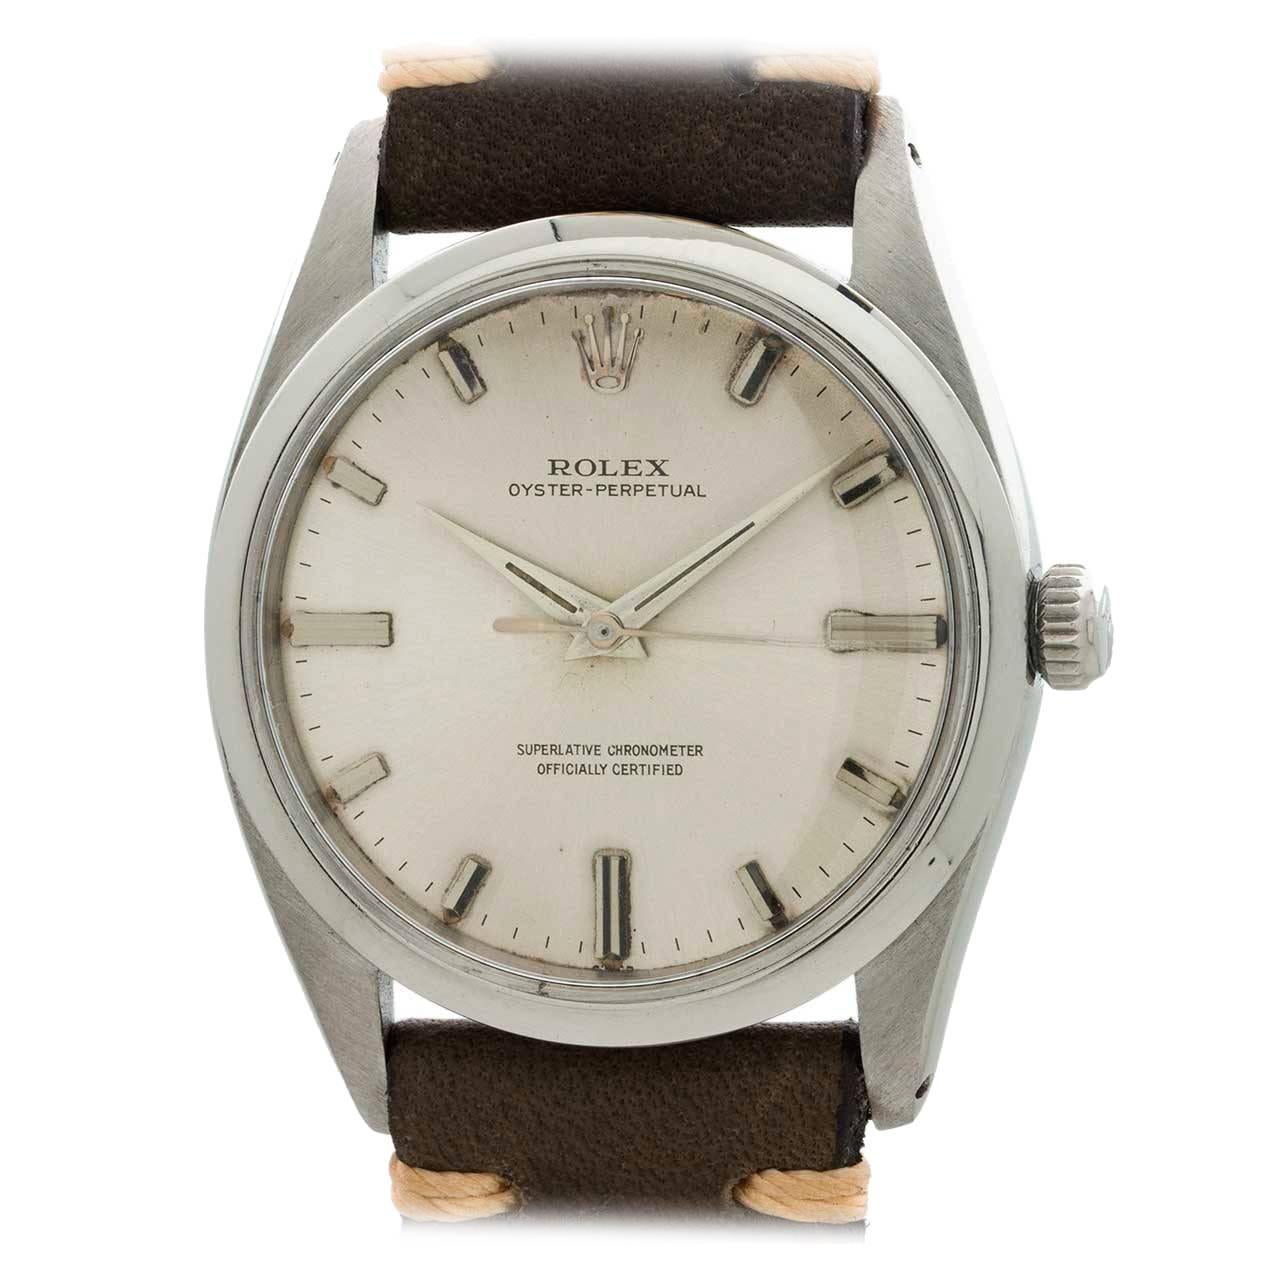 Rolex Stainless Steel Oyster Perpetual Wristwatch Ref 1018 circa 1962